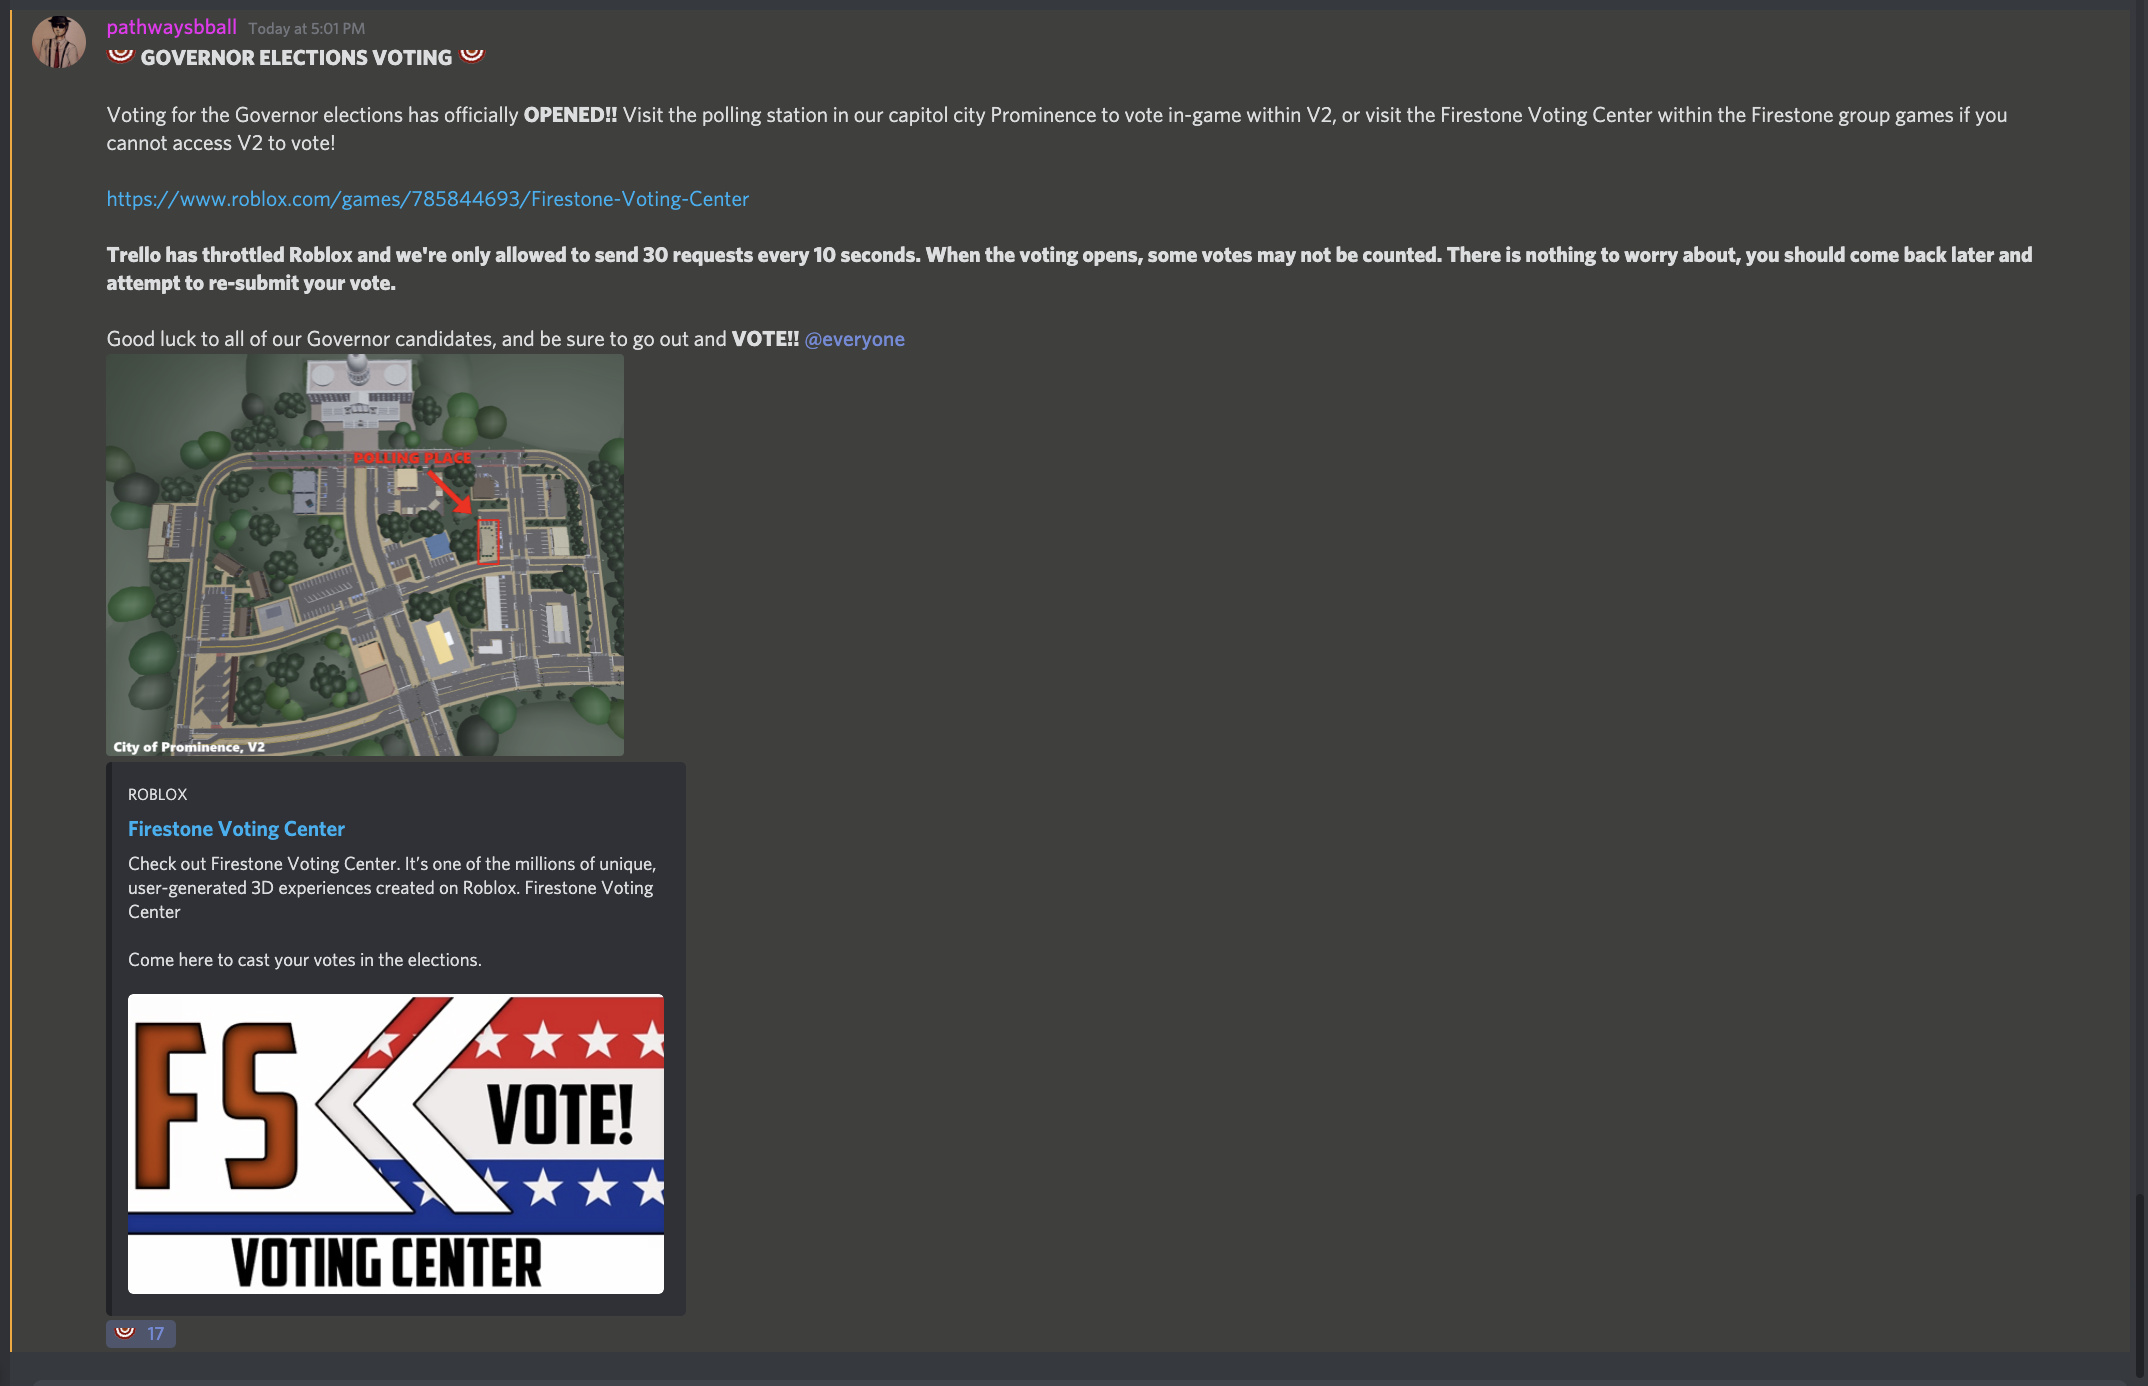 How To Vote For The 2020 Gubernatorial Elections Voting Open Voting Open Guidelines State Of Firestone Forums - roblox firestone discord